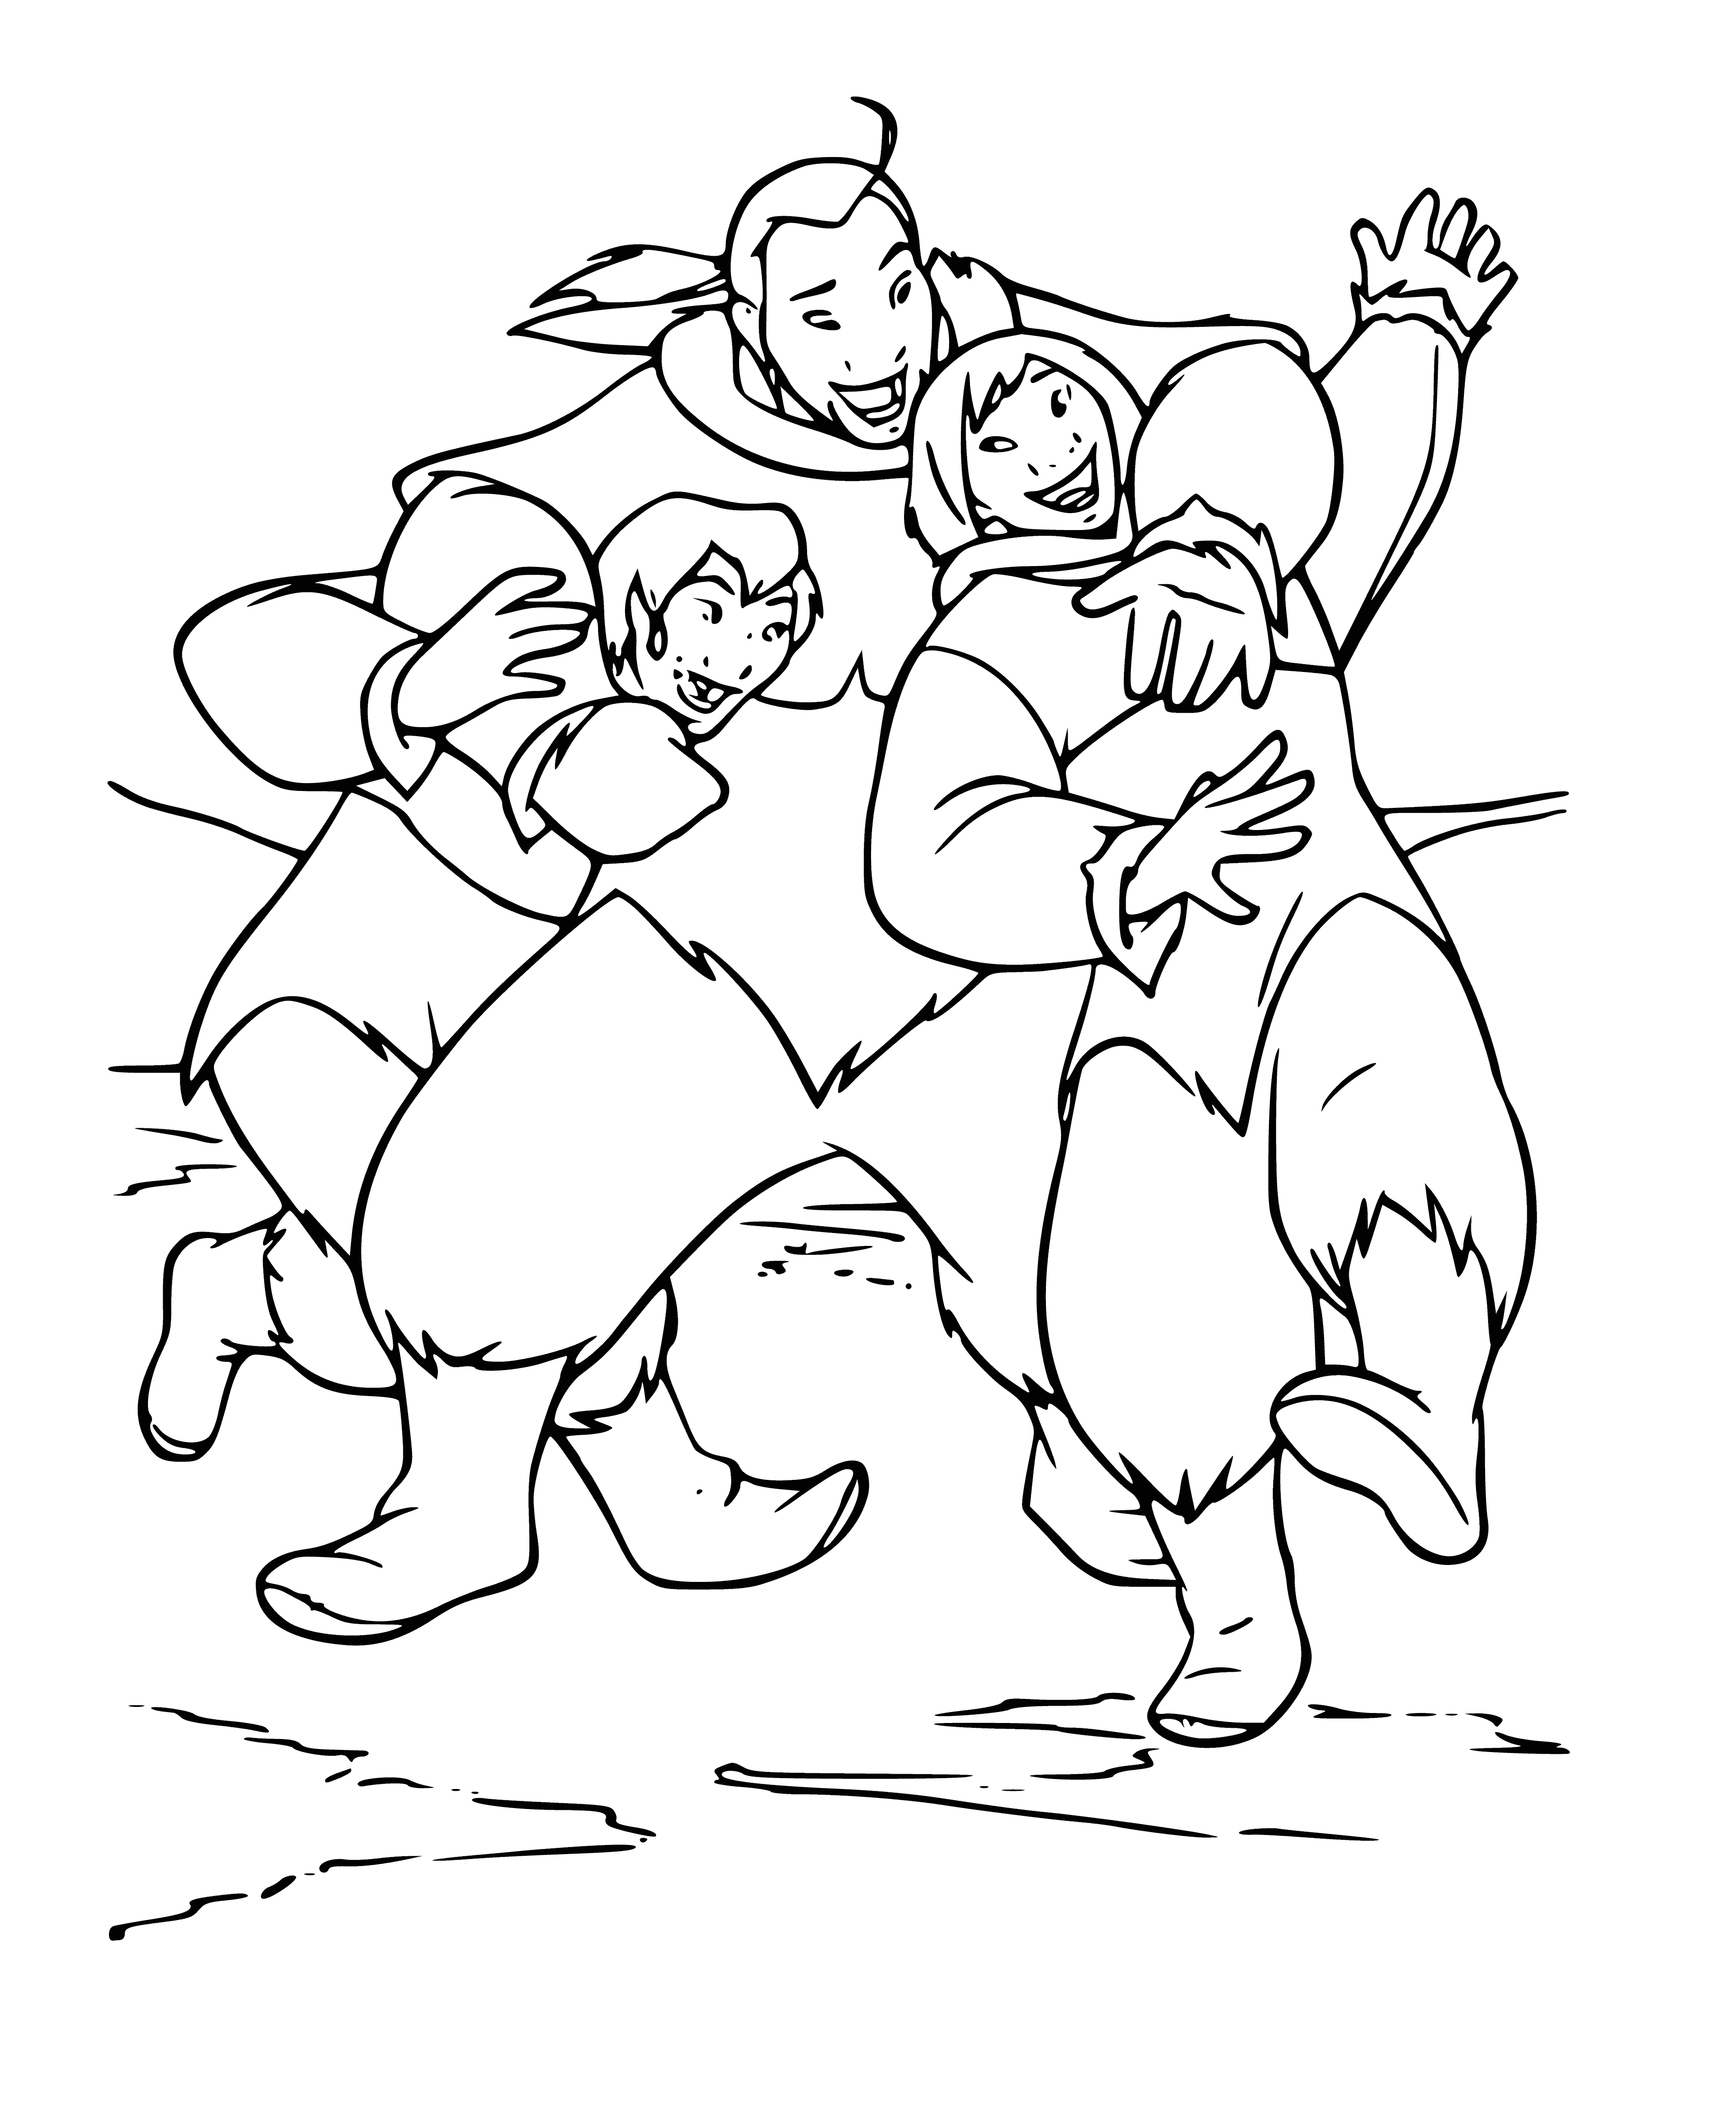 coloring page: 3 brothers smiling & having fun in a coloring page!